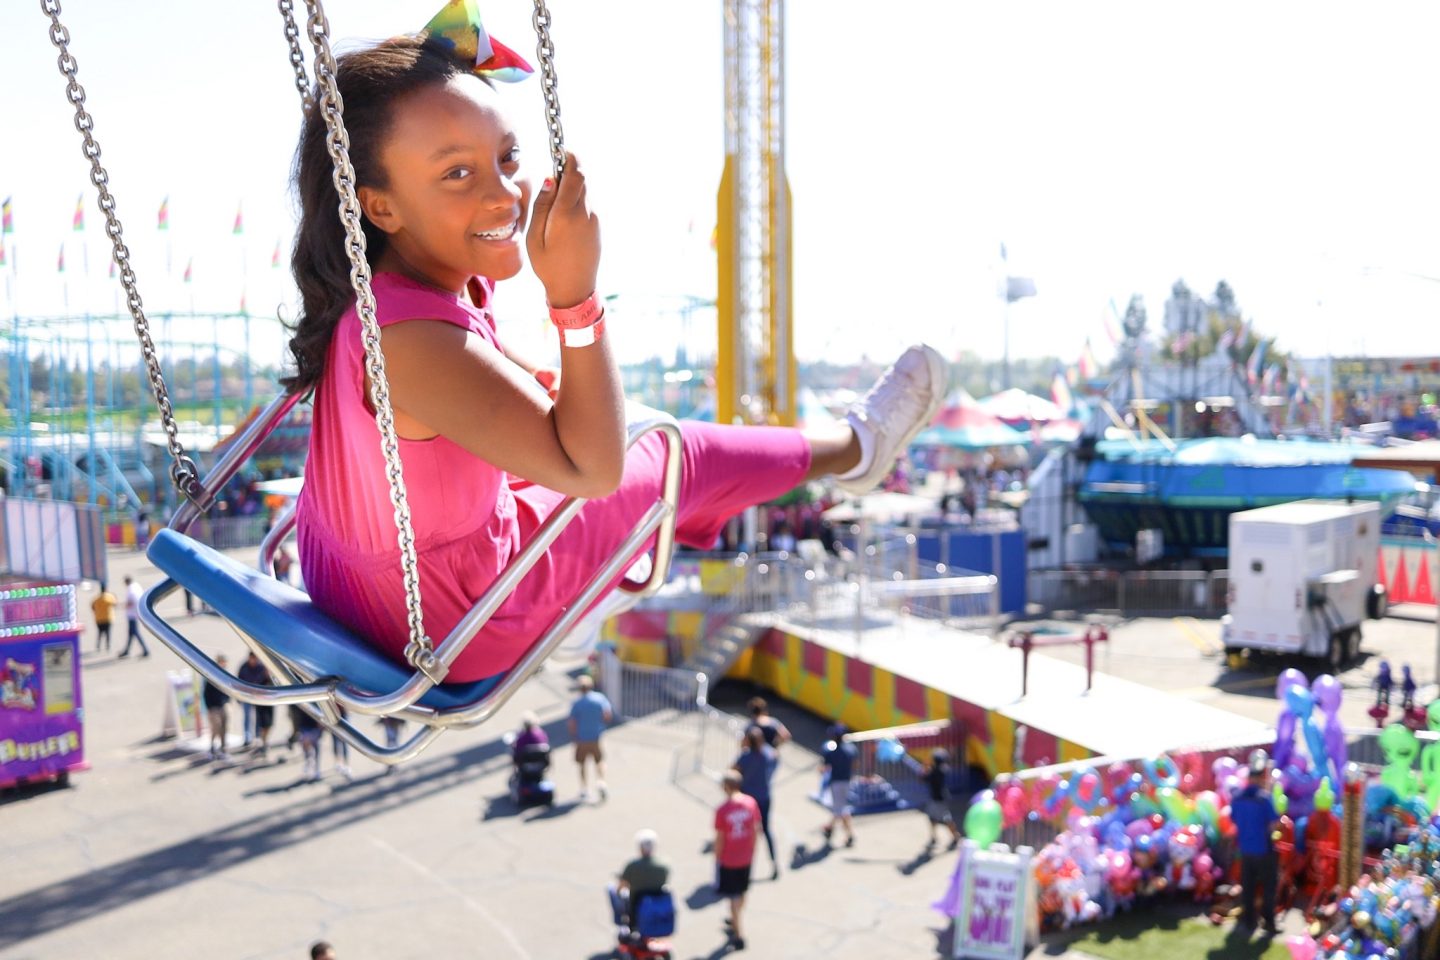 Things to do at the Fresno Fair